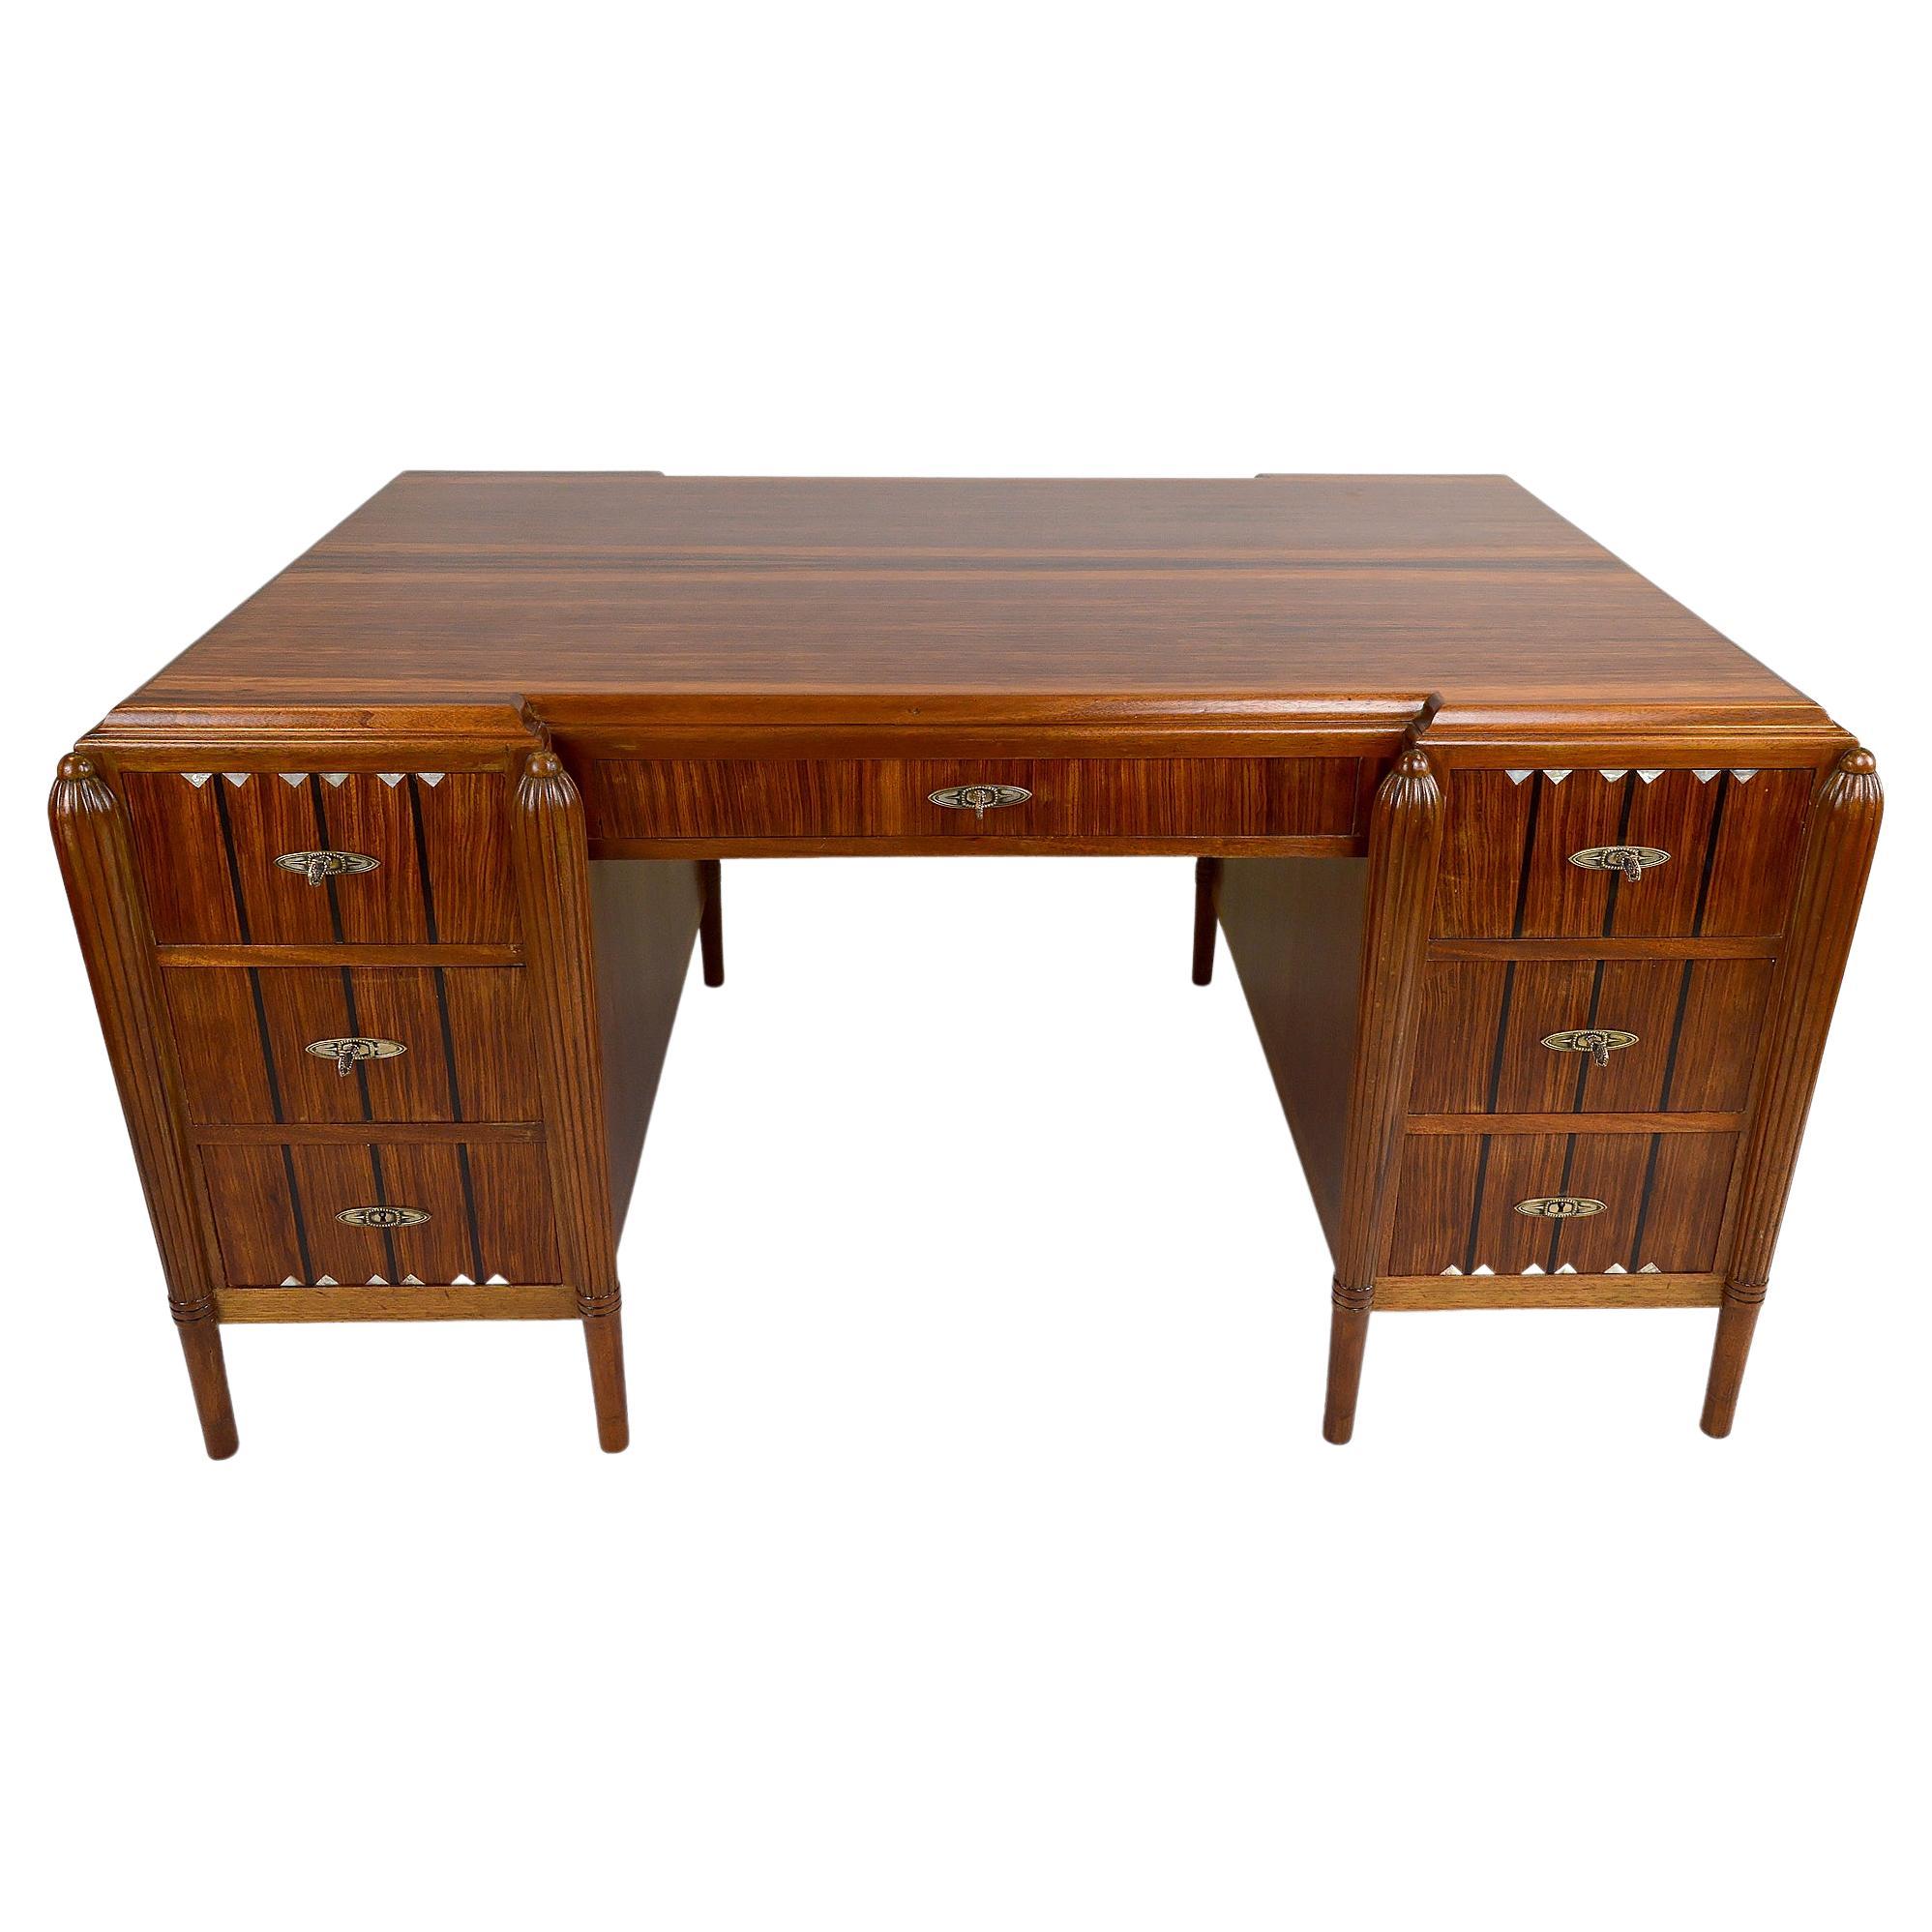 Large Art Deco Desk in Rosewood, Mother-of-Pearl and Ebony, France, circa 1920